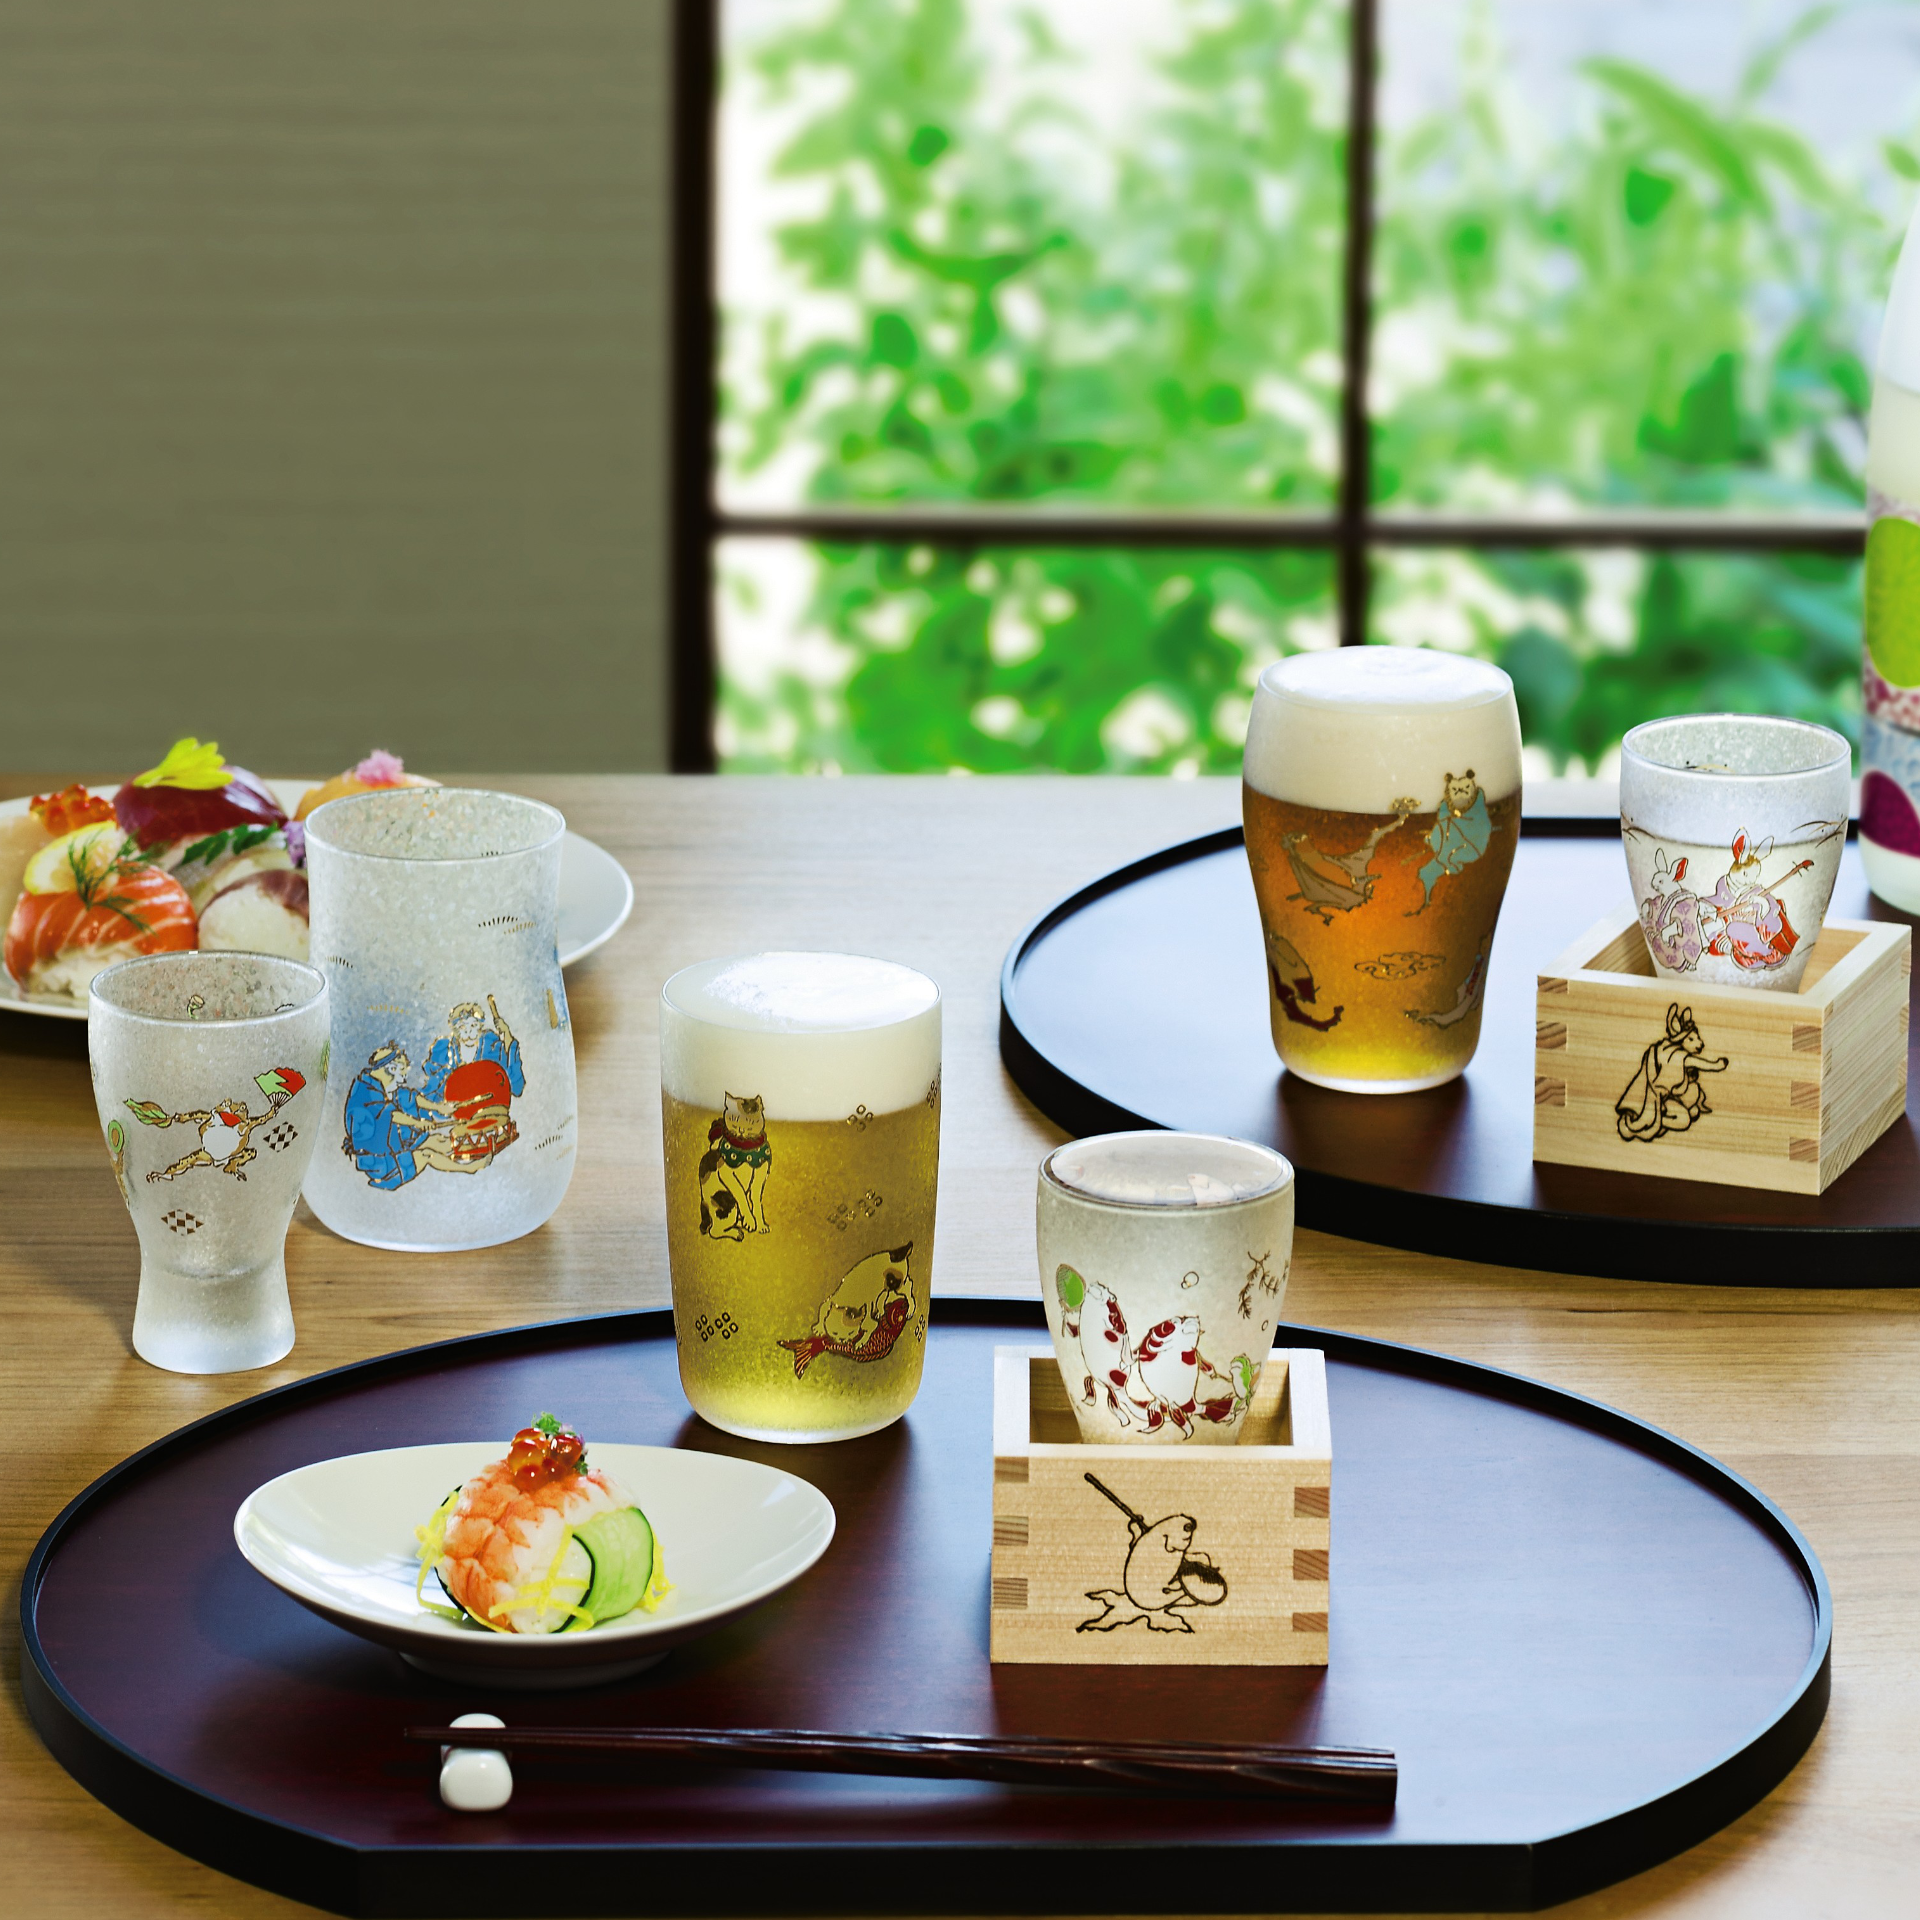 Lucky Animals Craft Beer Glass With Gift Box / Monkey 猿